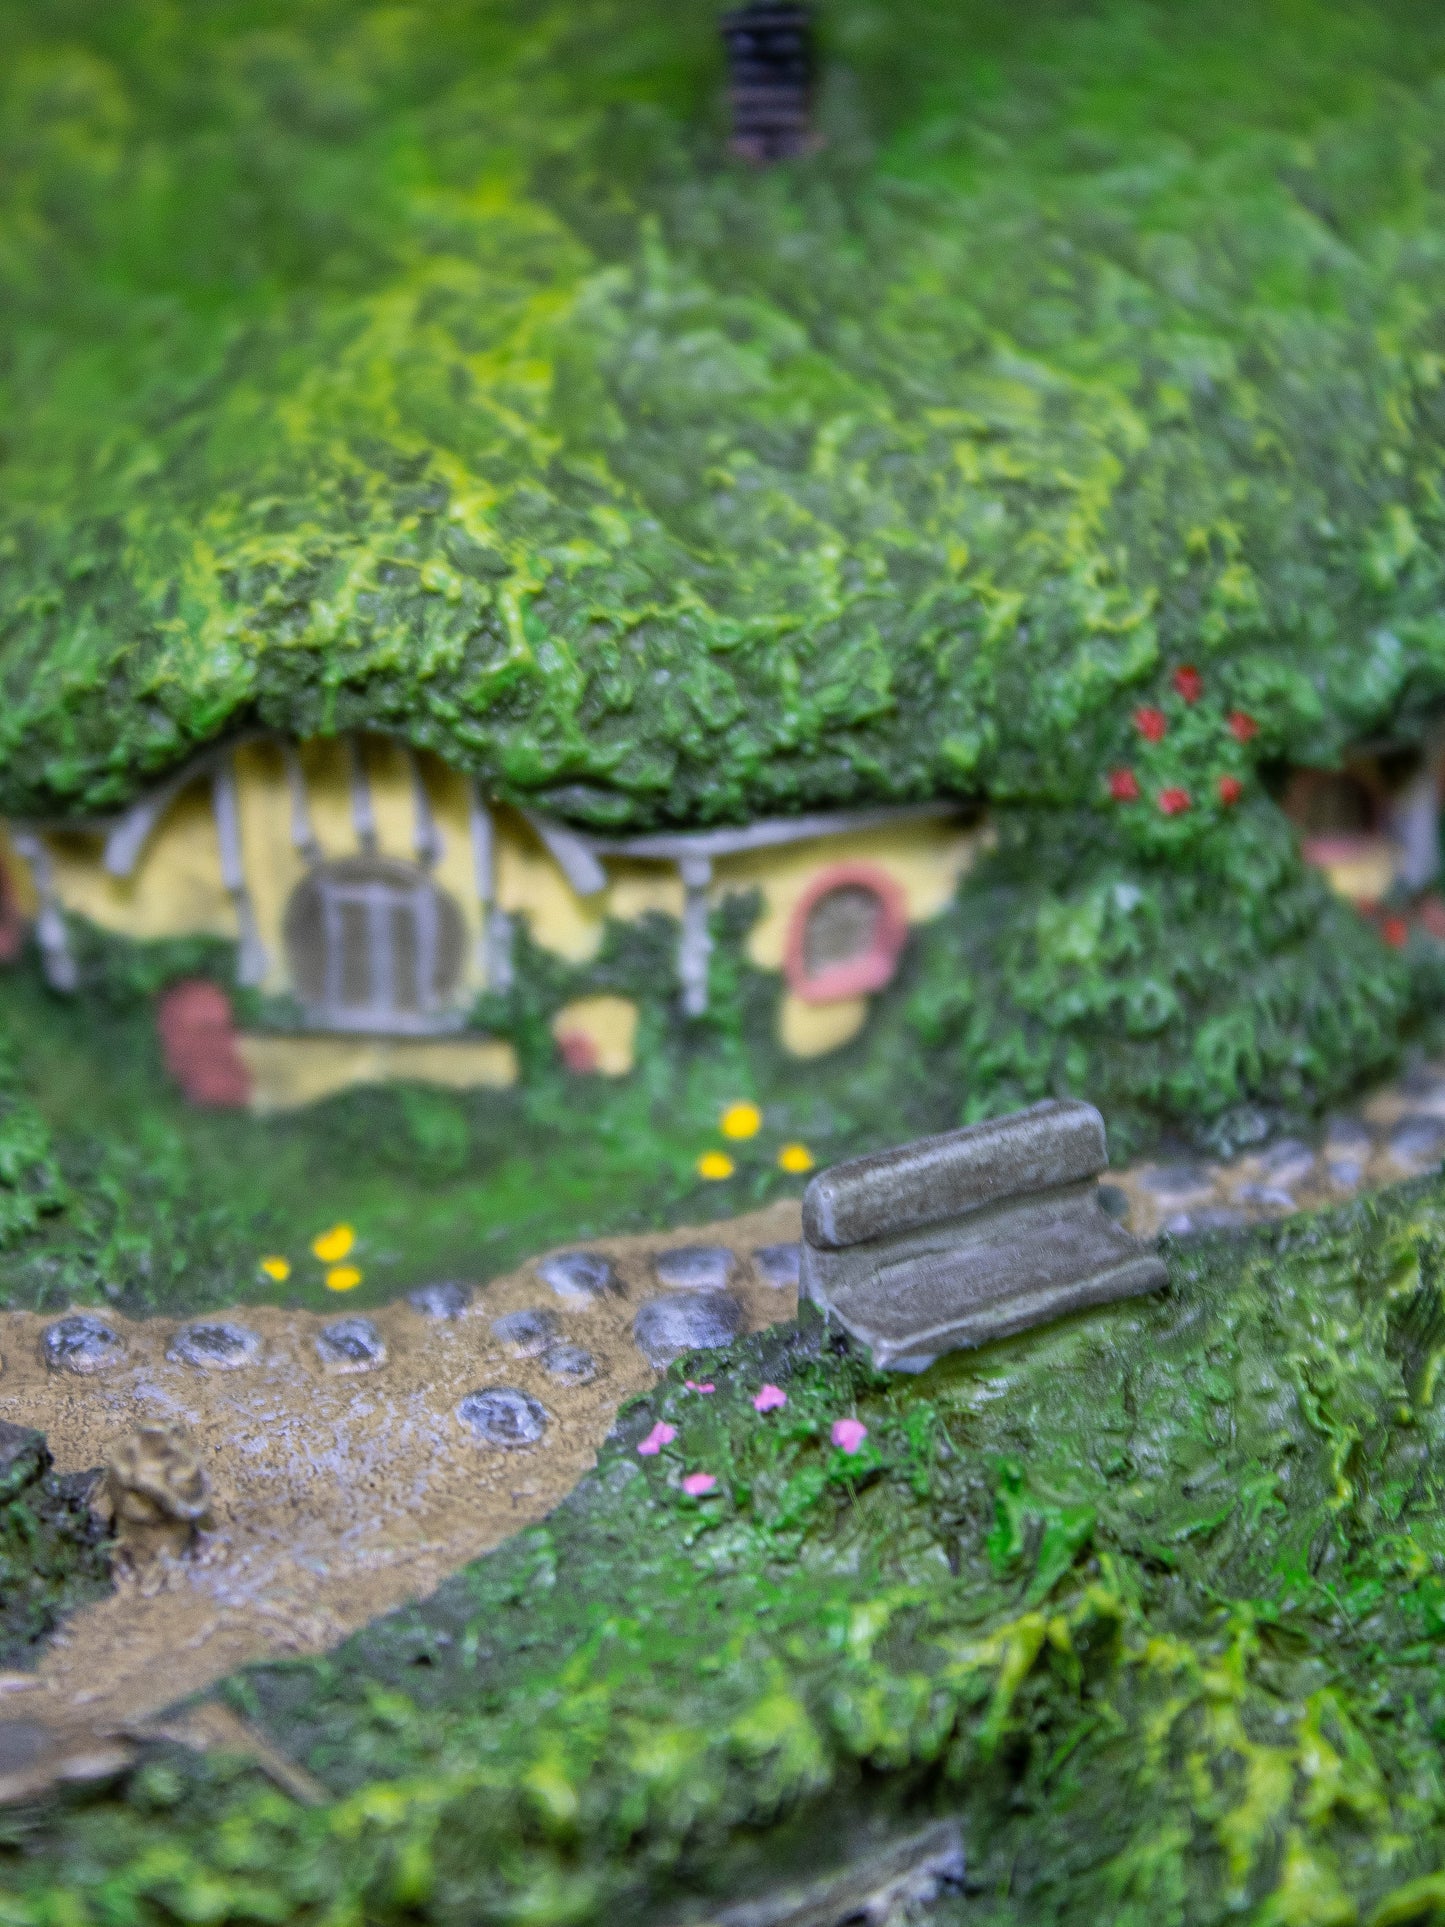 Load image into Gallery viewer, Bag End Hobbit Hole (Lord of the Rings) Deluxe Statue by Weta Workshop
